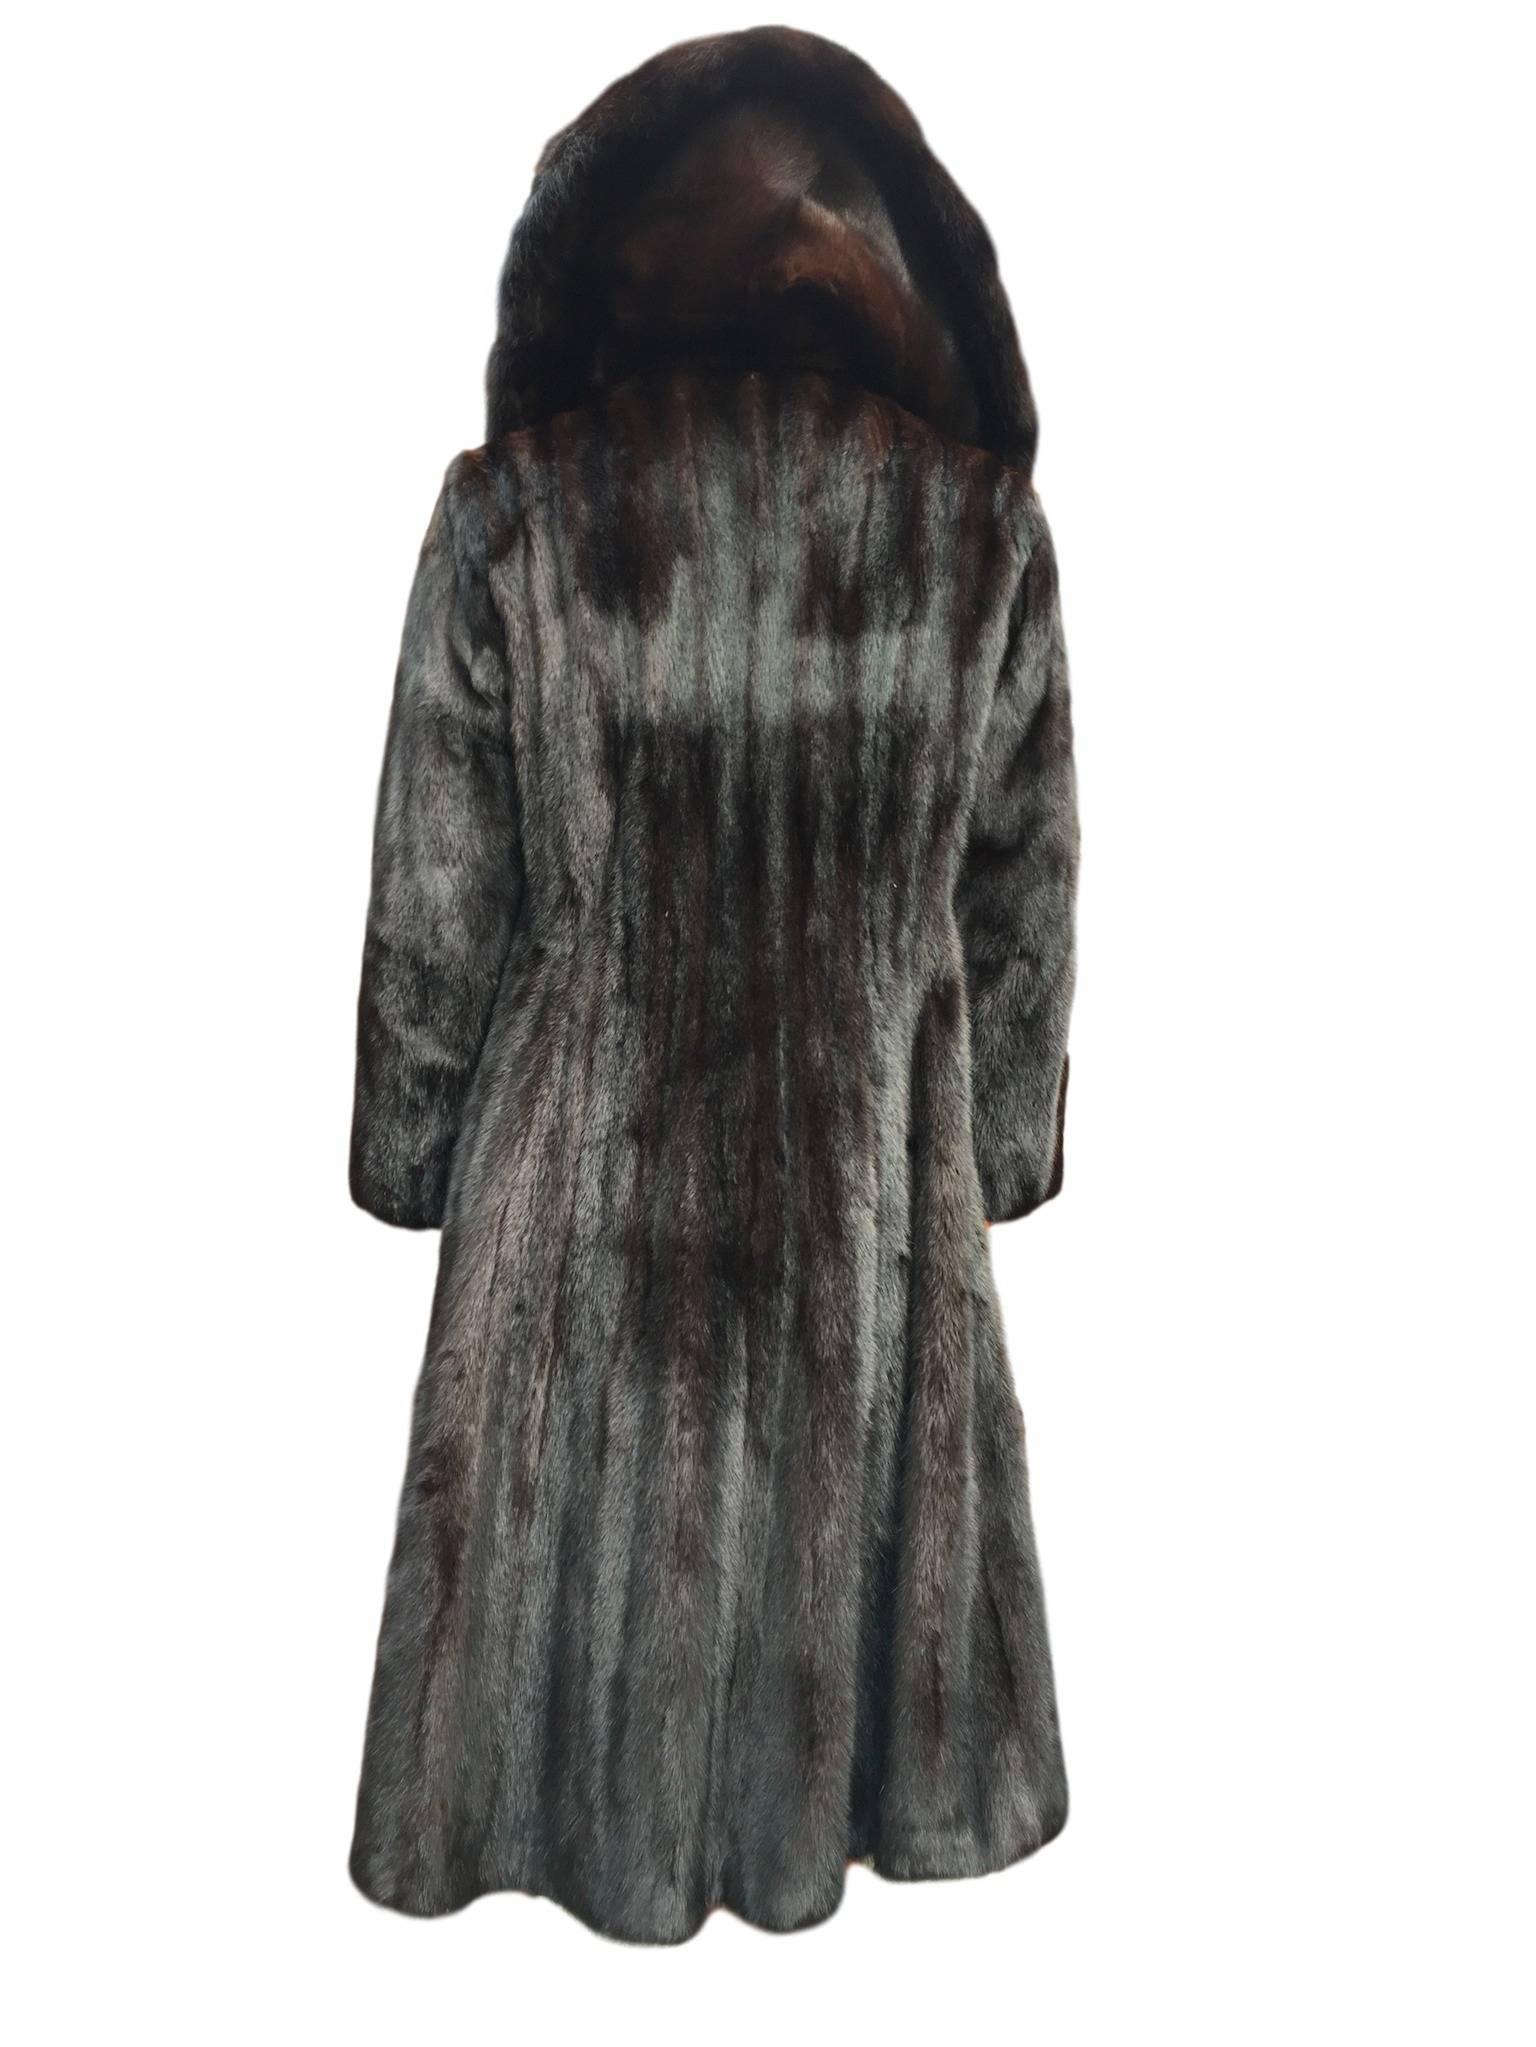 Vintage 1970s Blackglama at Hudsons Bay dark mink coat. Made from the darkest natural mink pelts. Has original belt, fox fur collar at inner and mink on outer. Silk satin lined, has original owners name stitched into it. 

Size Uk 8. Measures 18